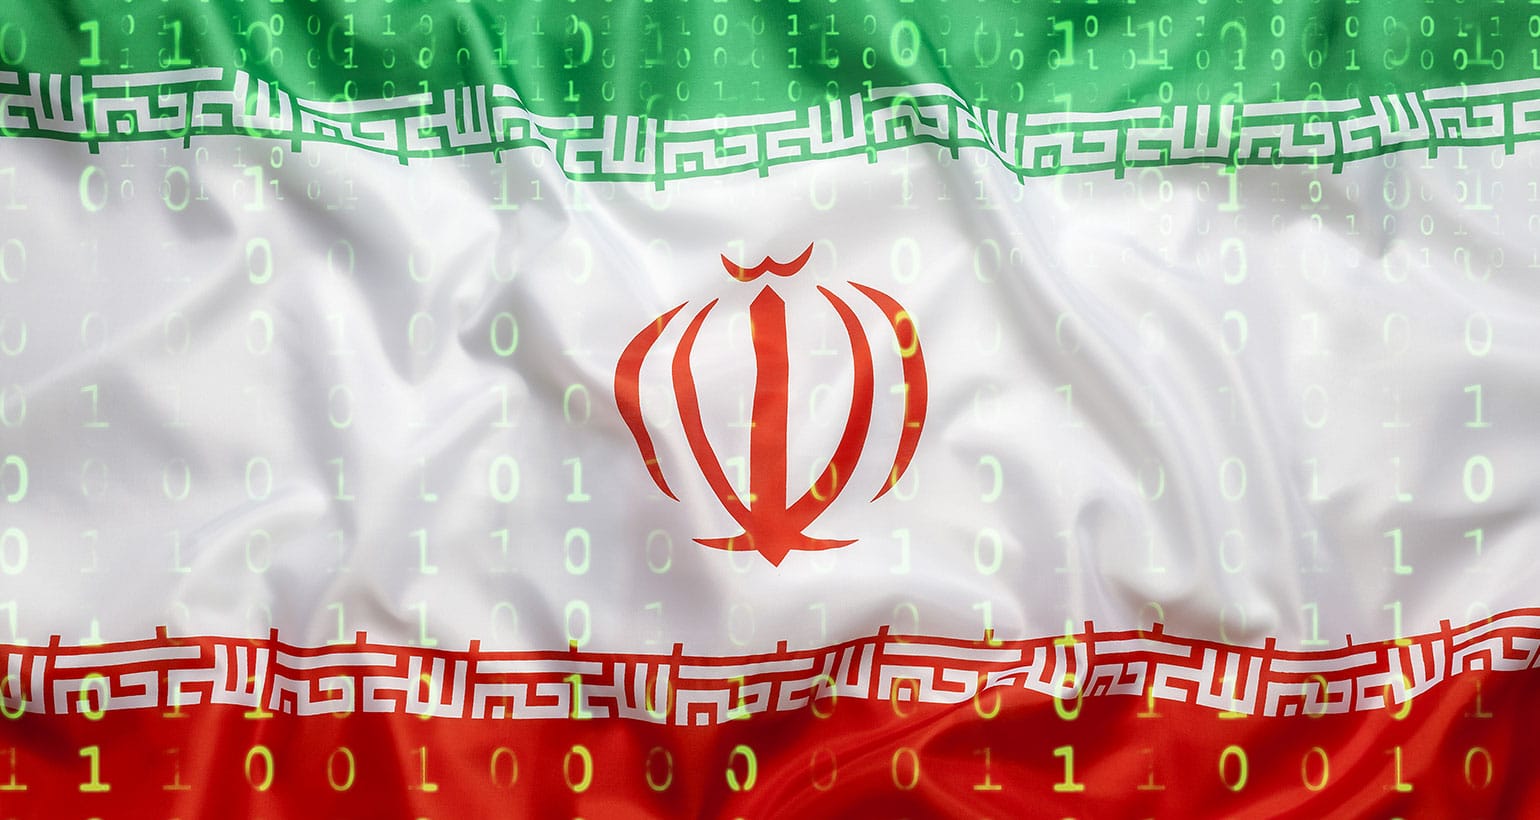 The Iranian flag superimposed with binary code.